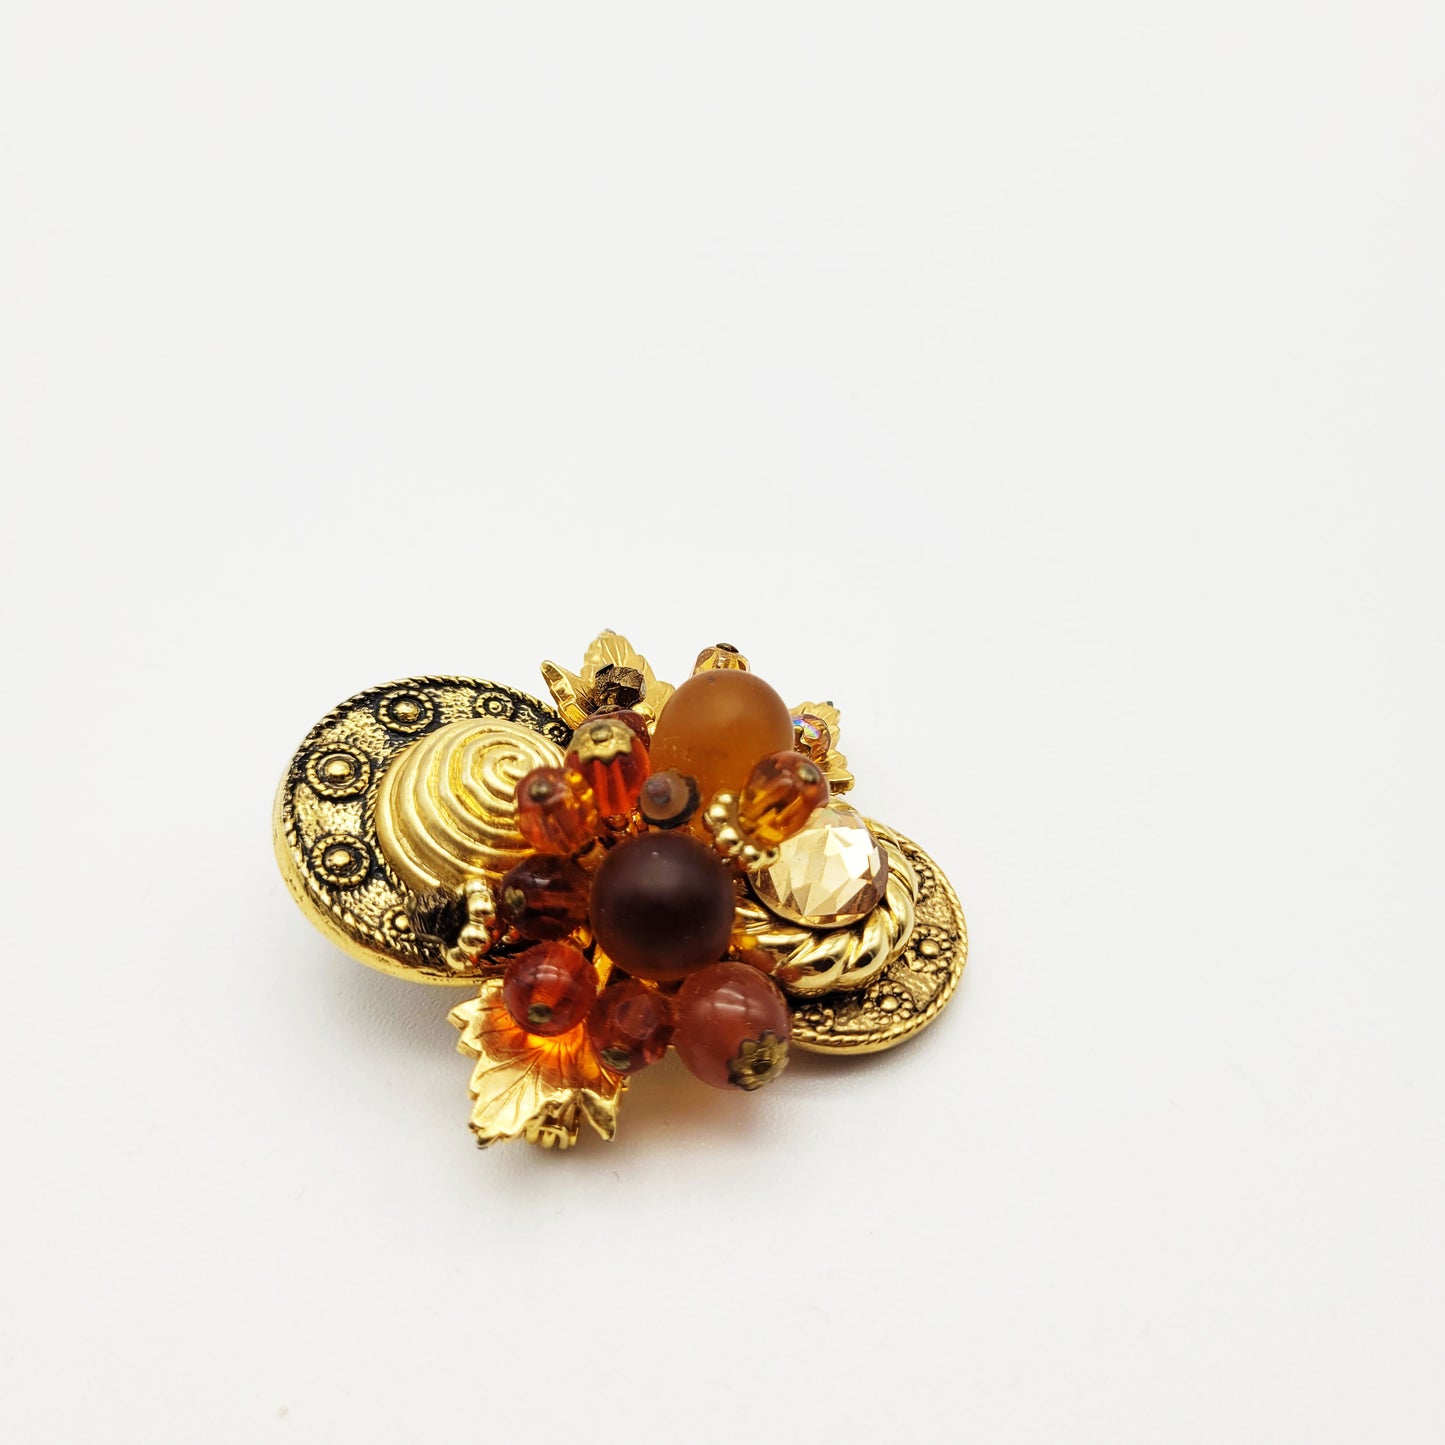 Vintage French brooch